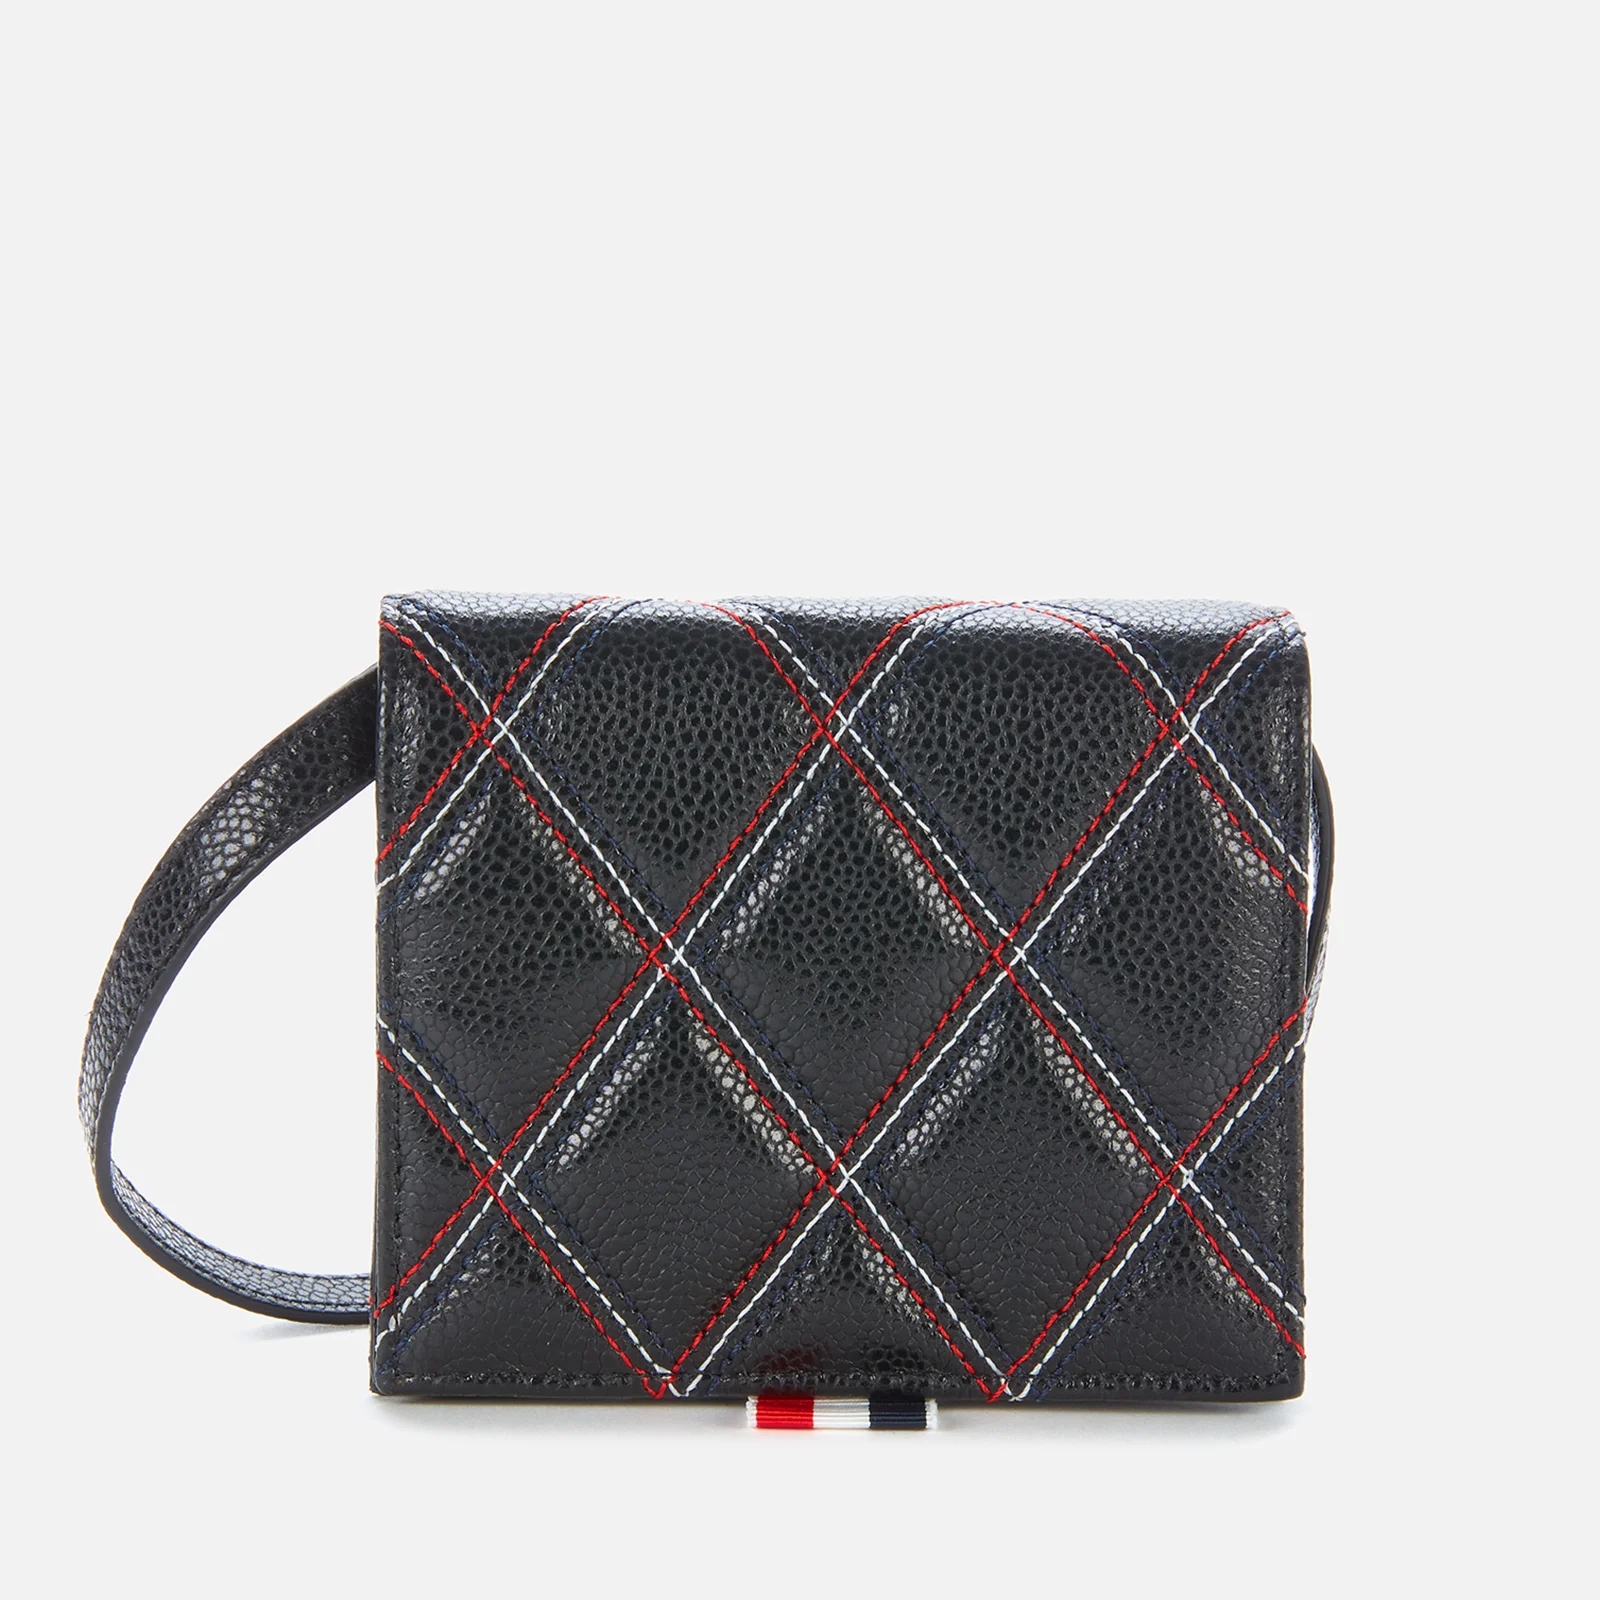 Thom Browne Women's Quilted Card Holder with Shoulder Strap - Black Image 1